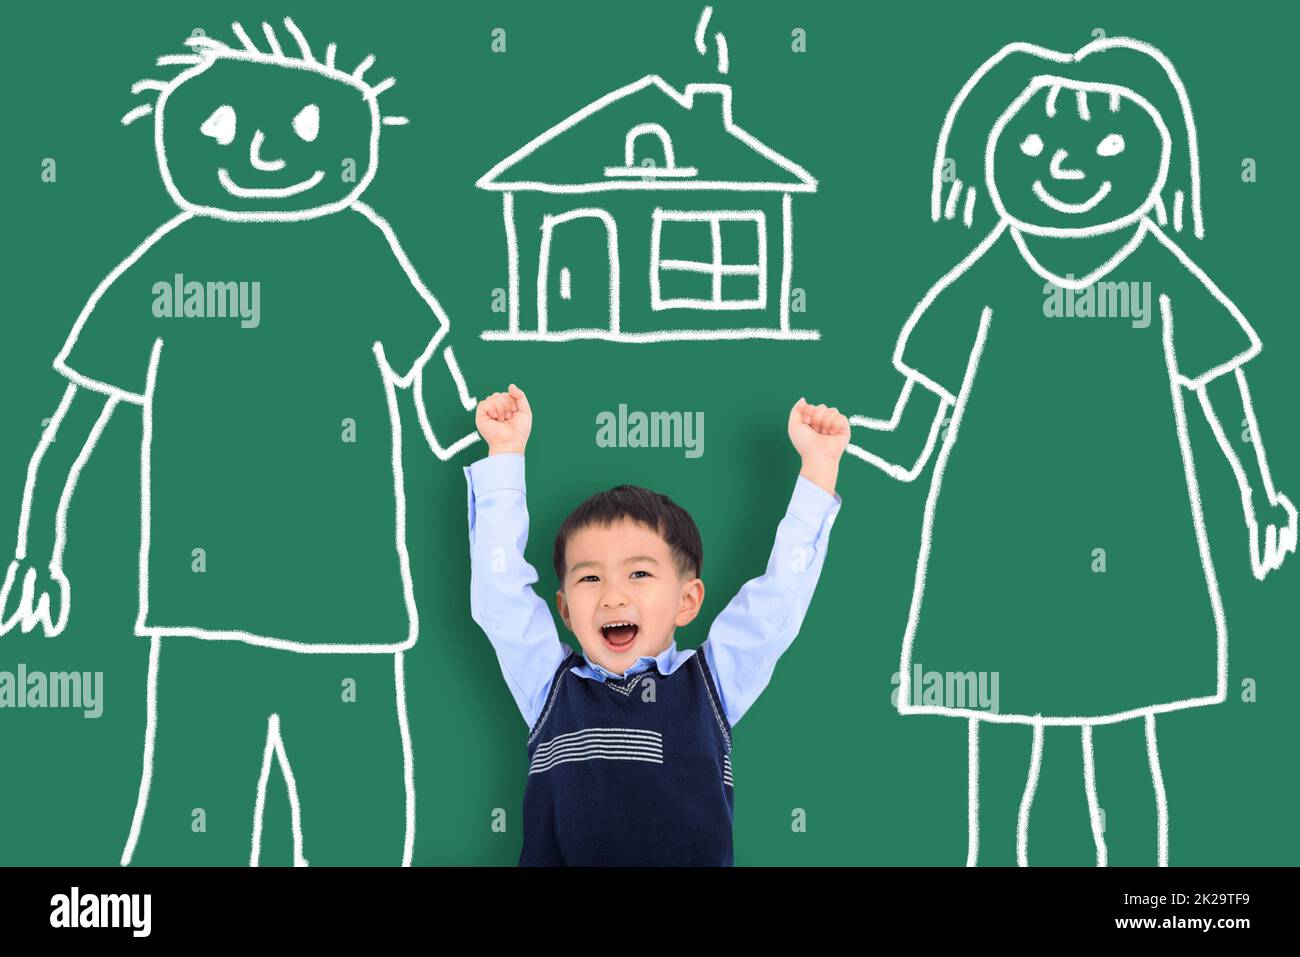 Happy kid with parent and family concepts Stock Photo